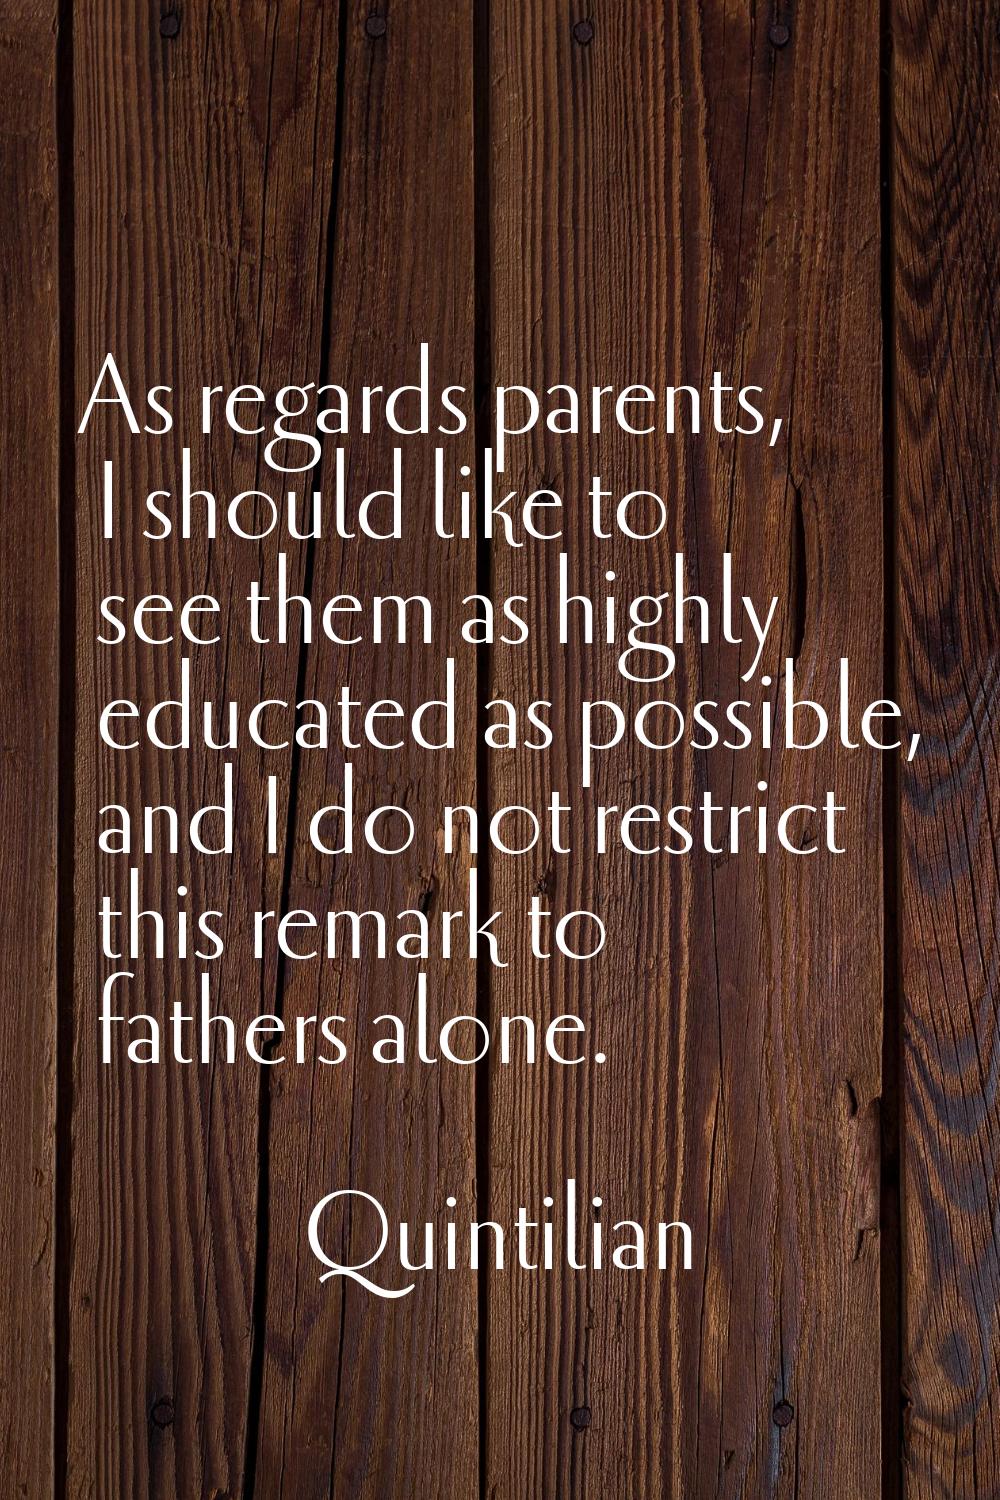 As regards parents, I should like to see them as highly educated as possible, and I do not restrict